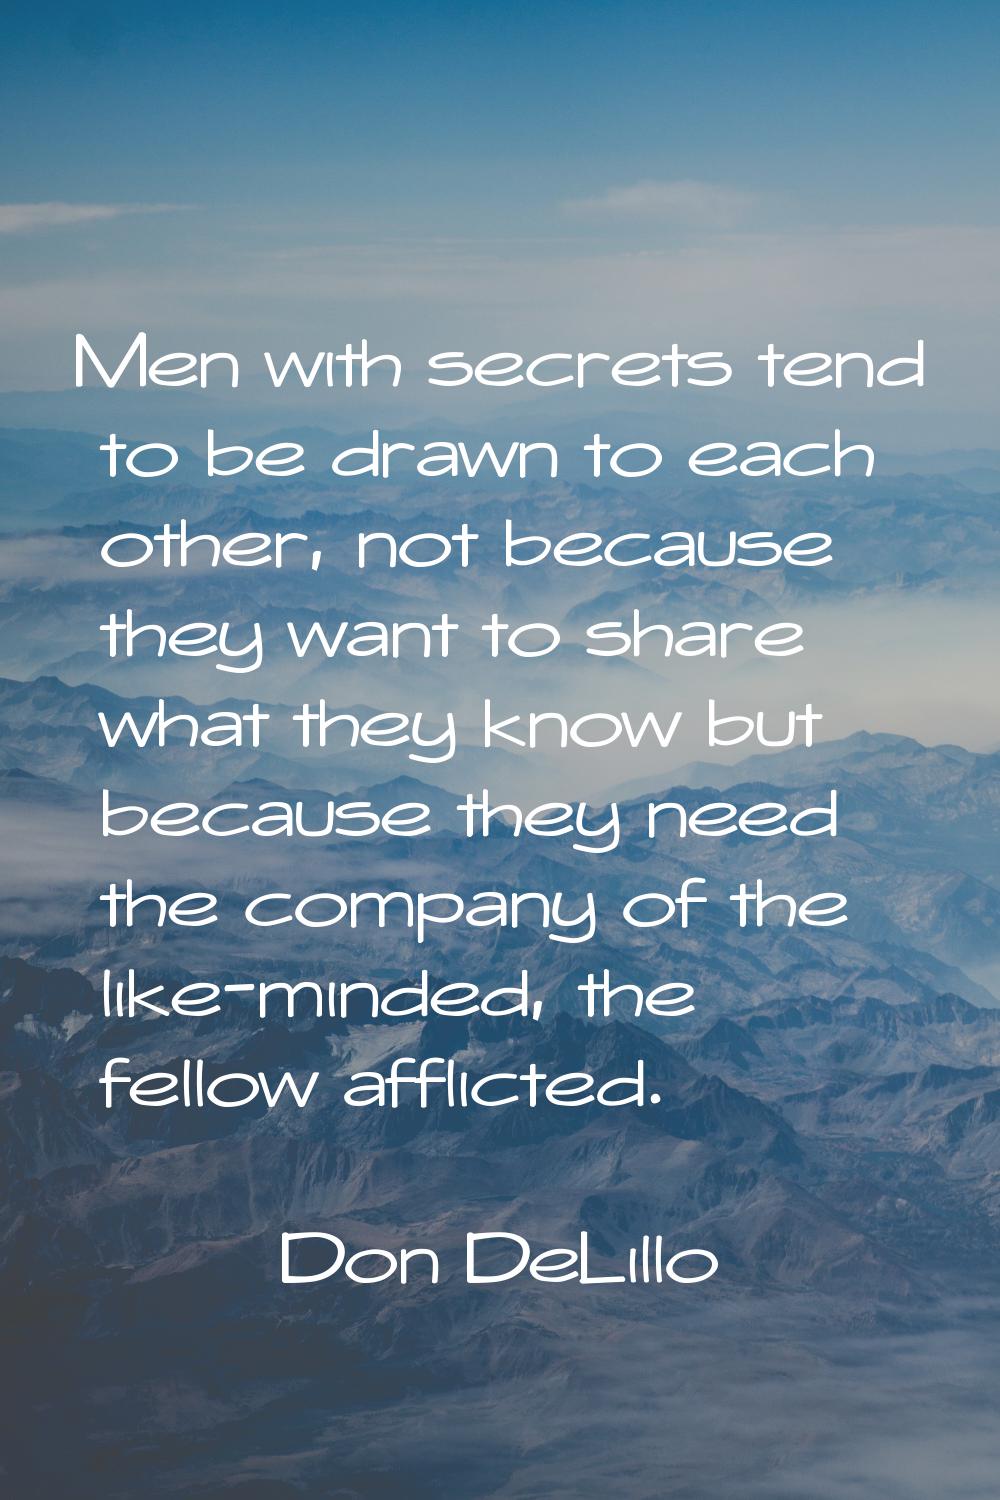 Men with secrets tend to be drawn to each other, not because they want to share what they know but 